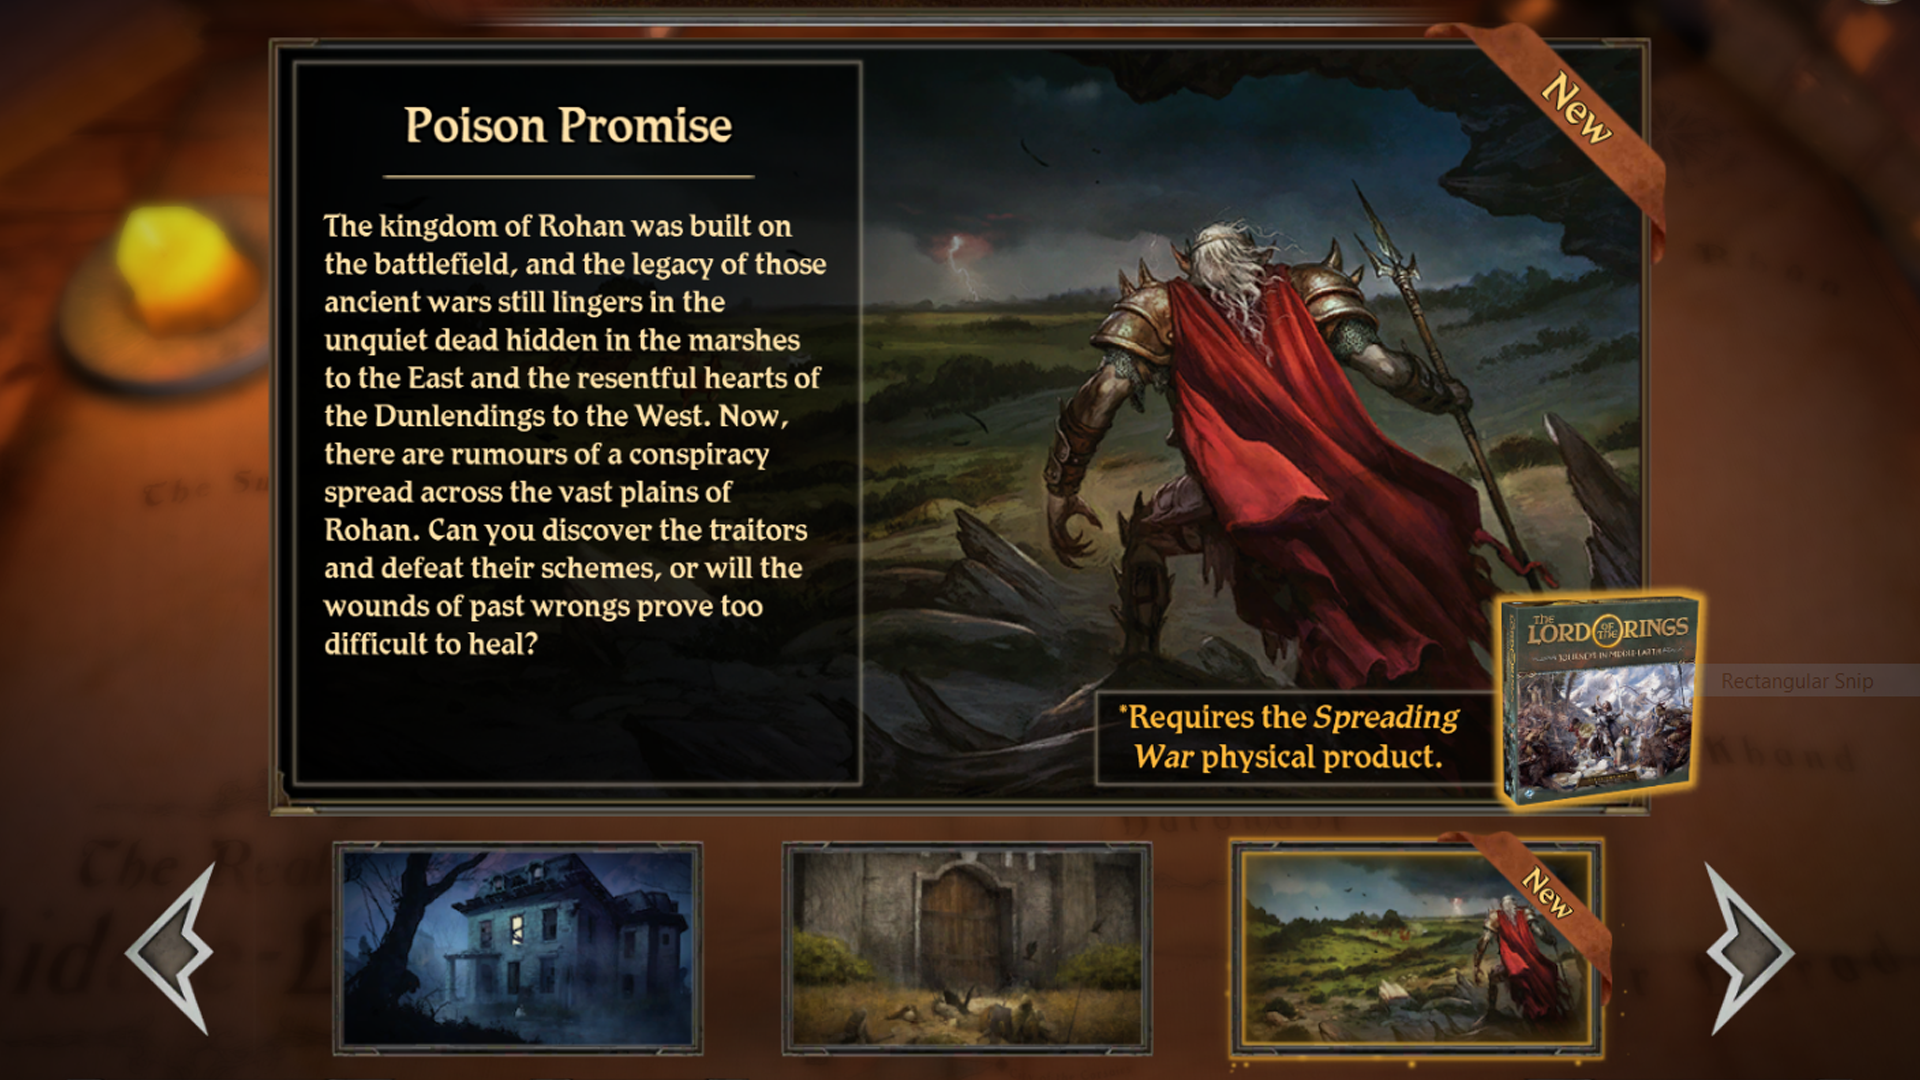 A screenshot for the Poison Promise campaign for Lord of the Rings: Journeys in Middle-earth